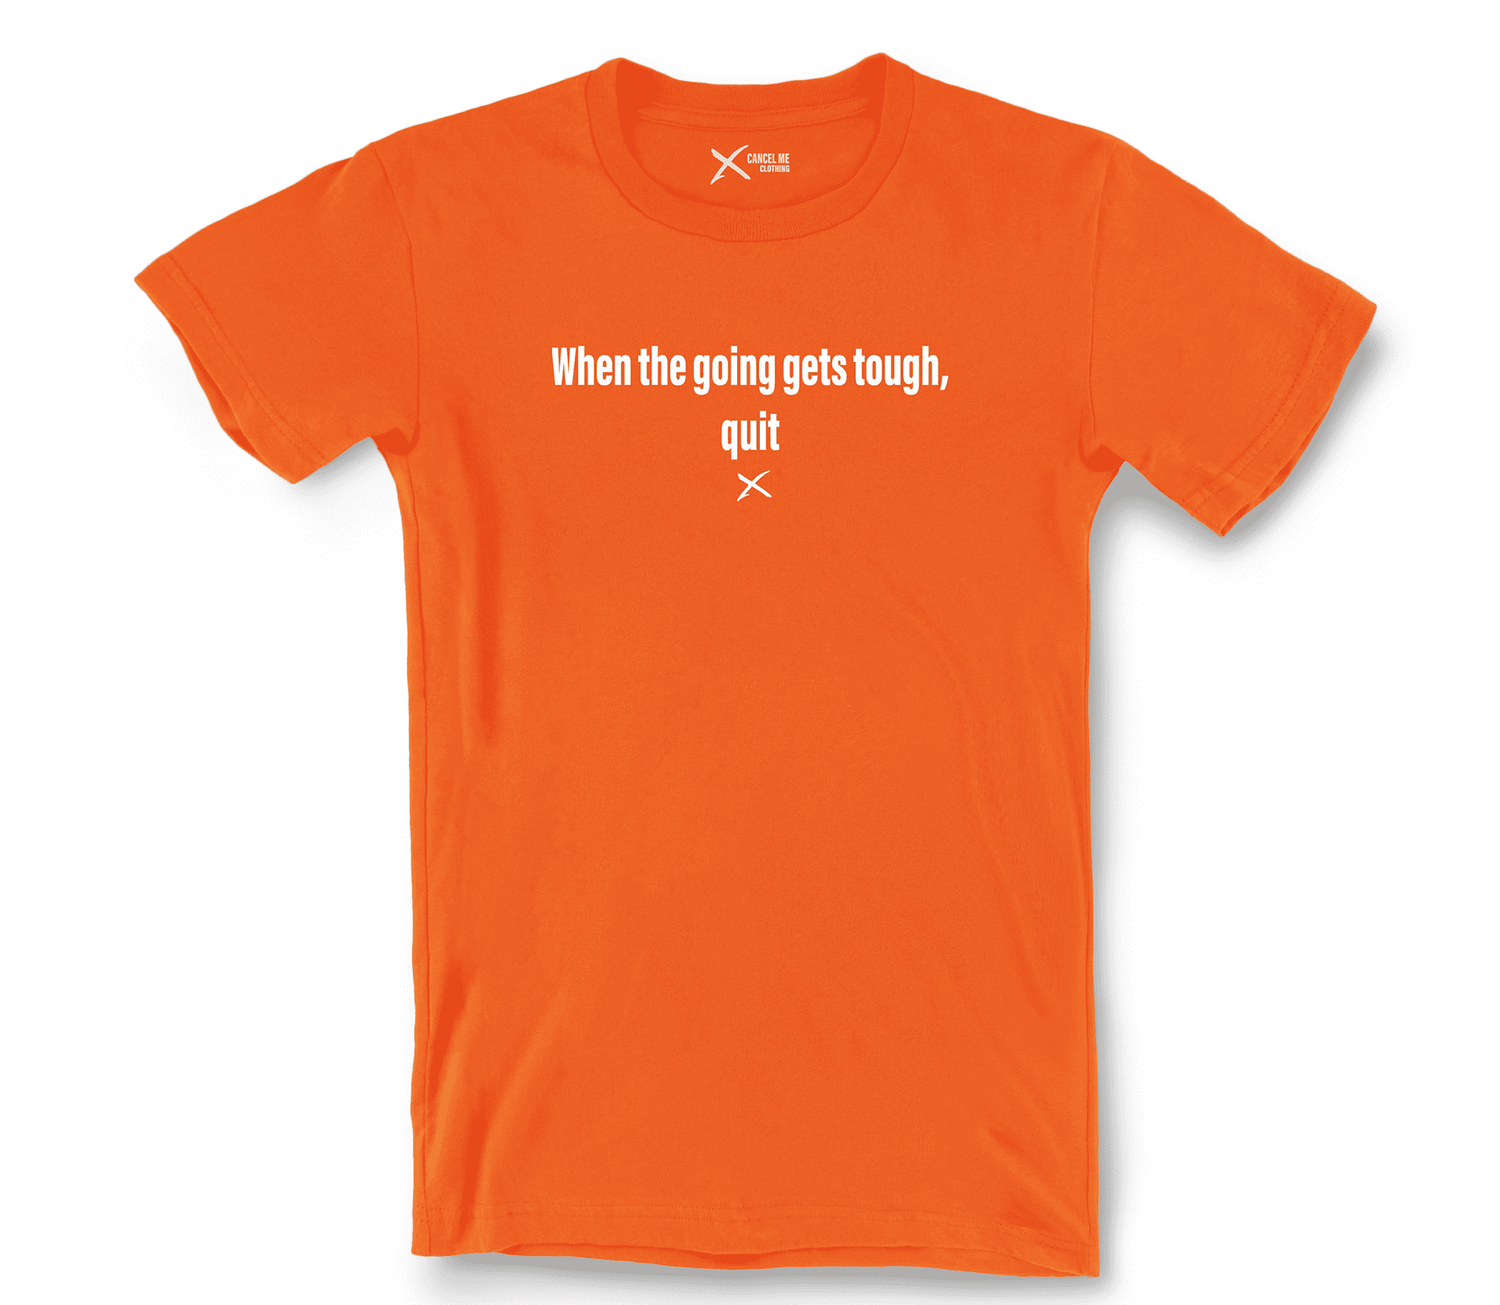 _7791807201450_when-the-going-gets-tough-quit-shirt_Orange.png